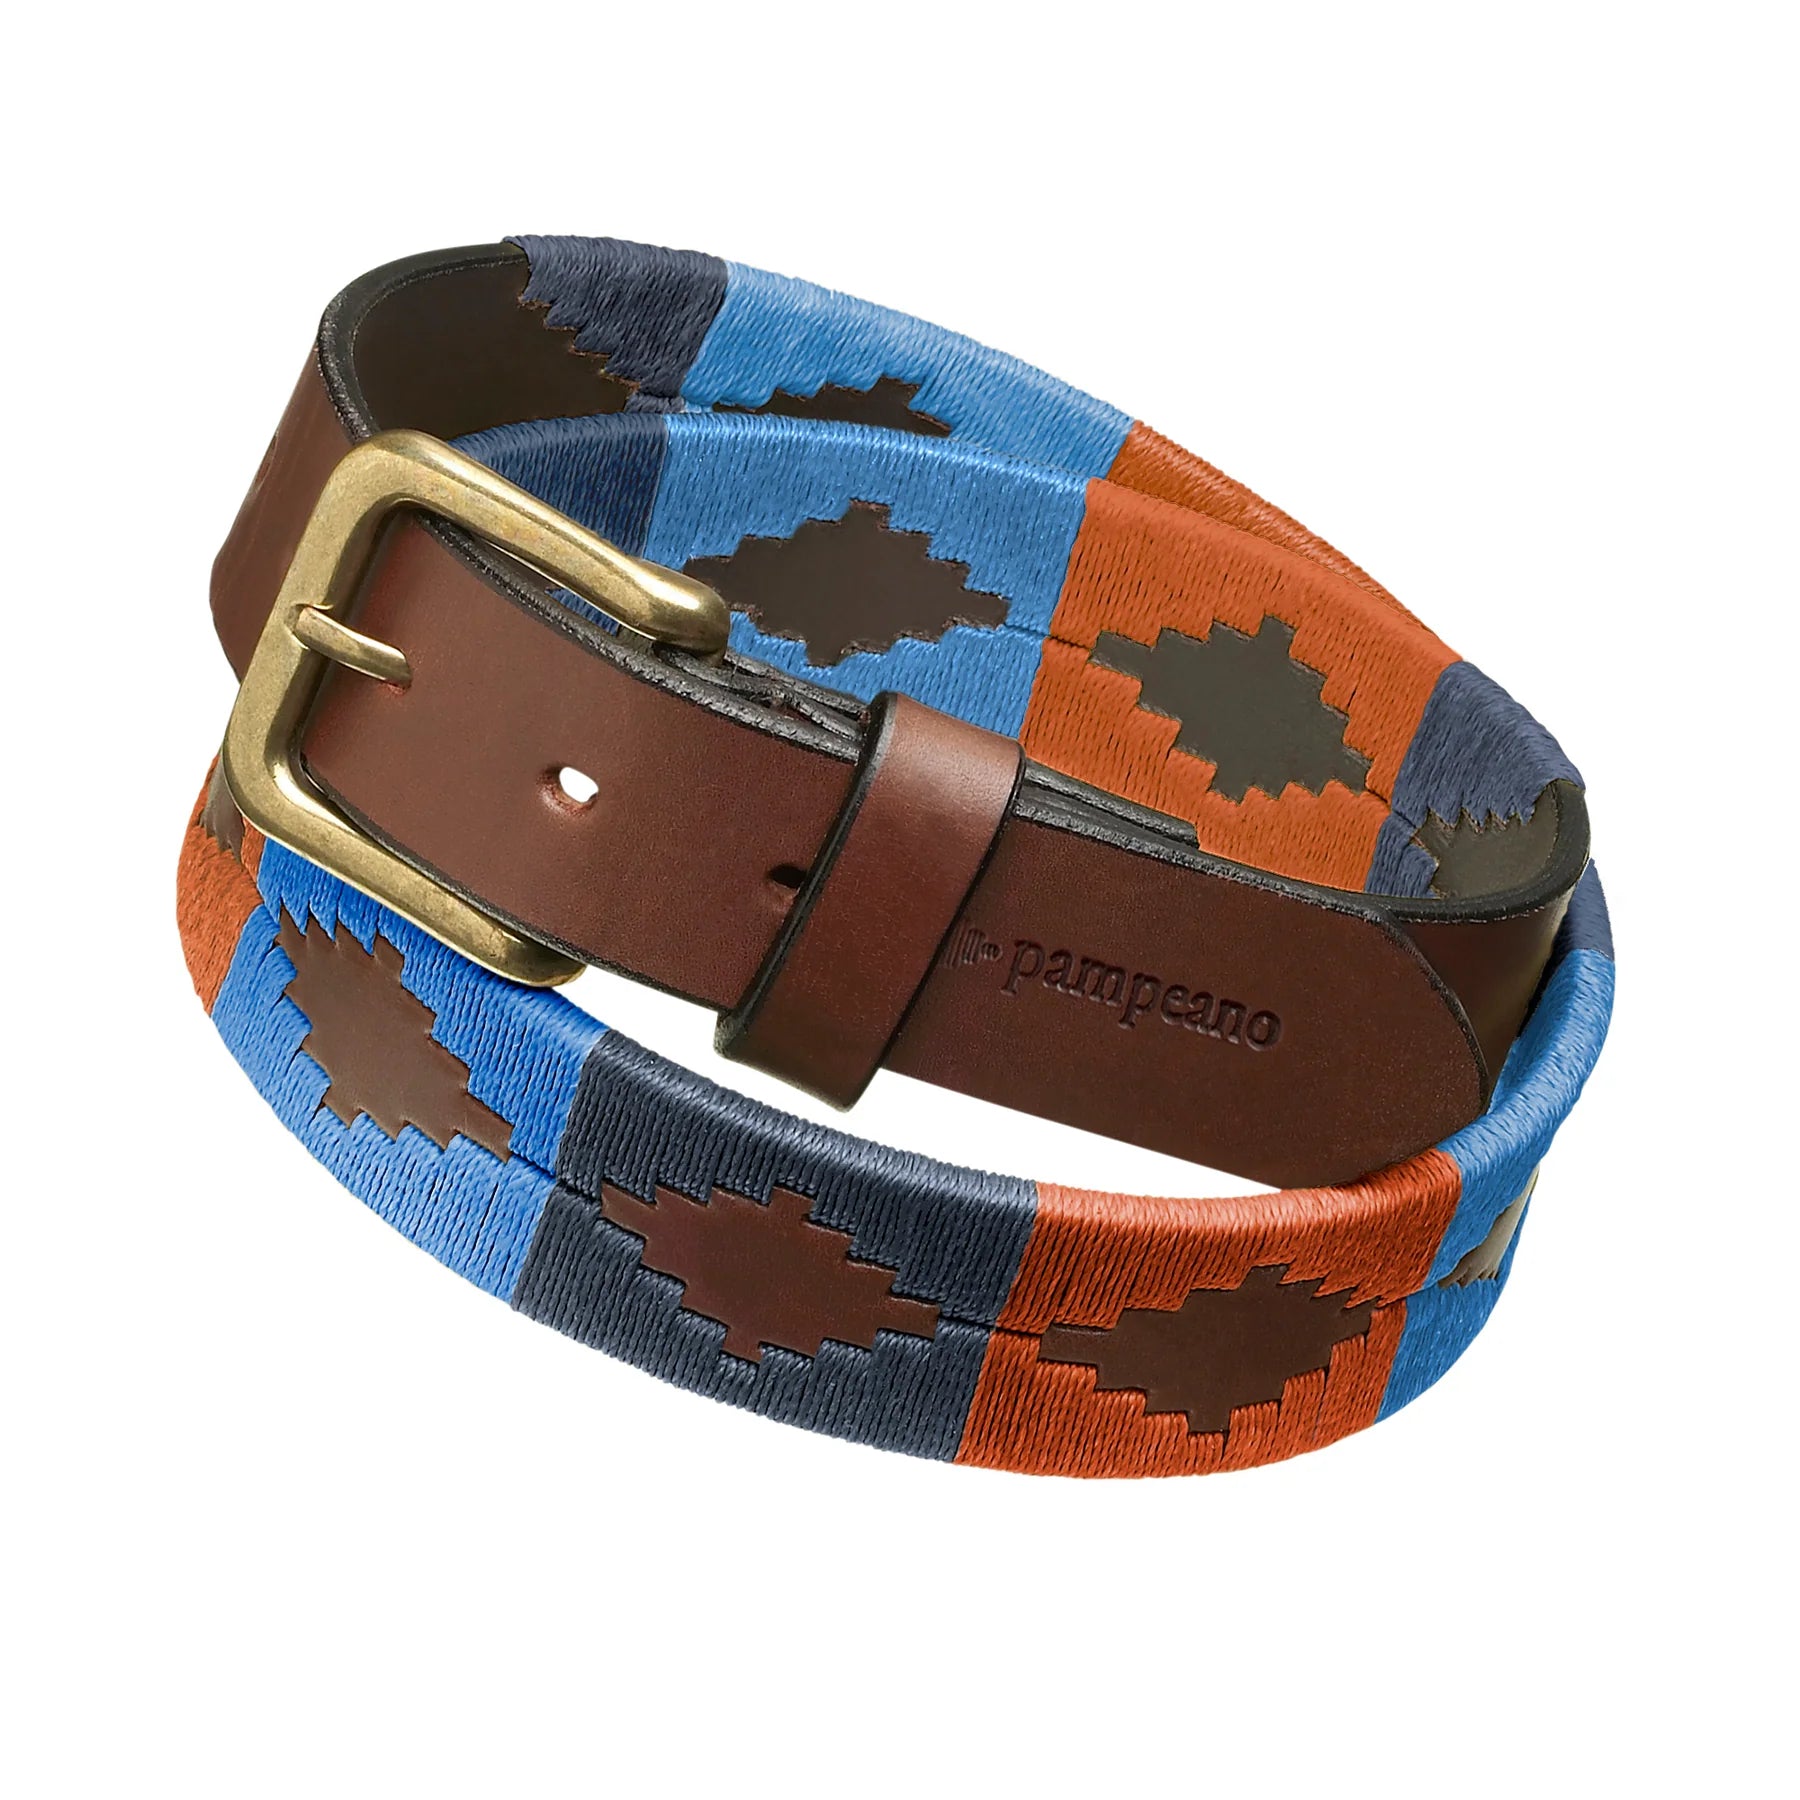 Pampeano Polo Leather Belt  The Lumbre in orange, sky blue and navy blue